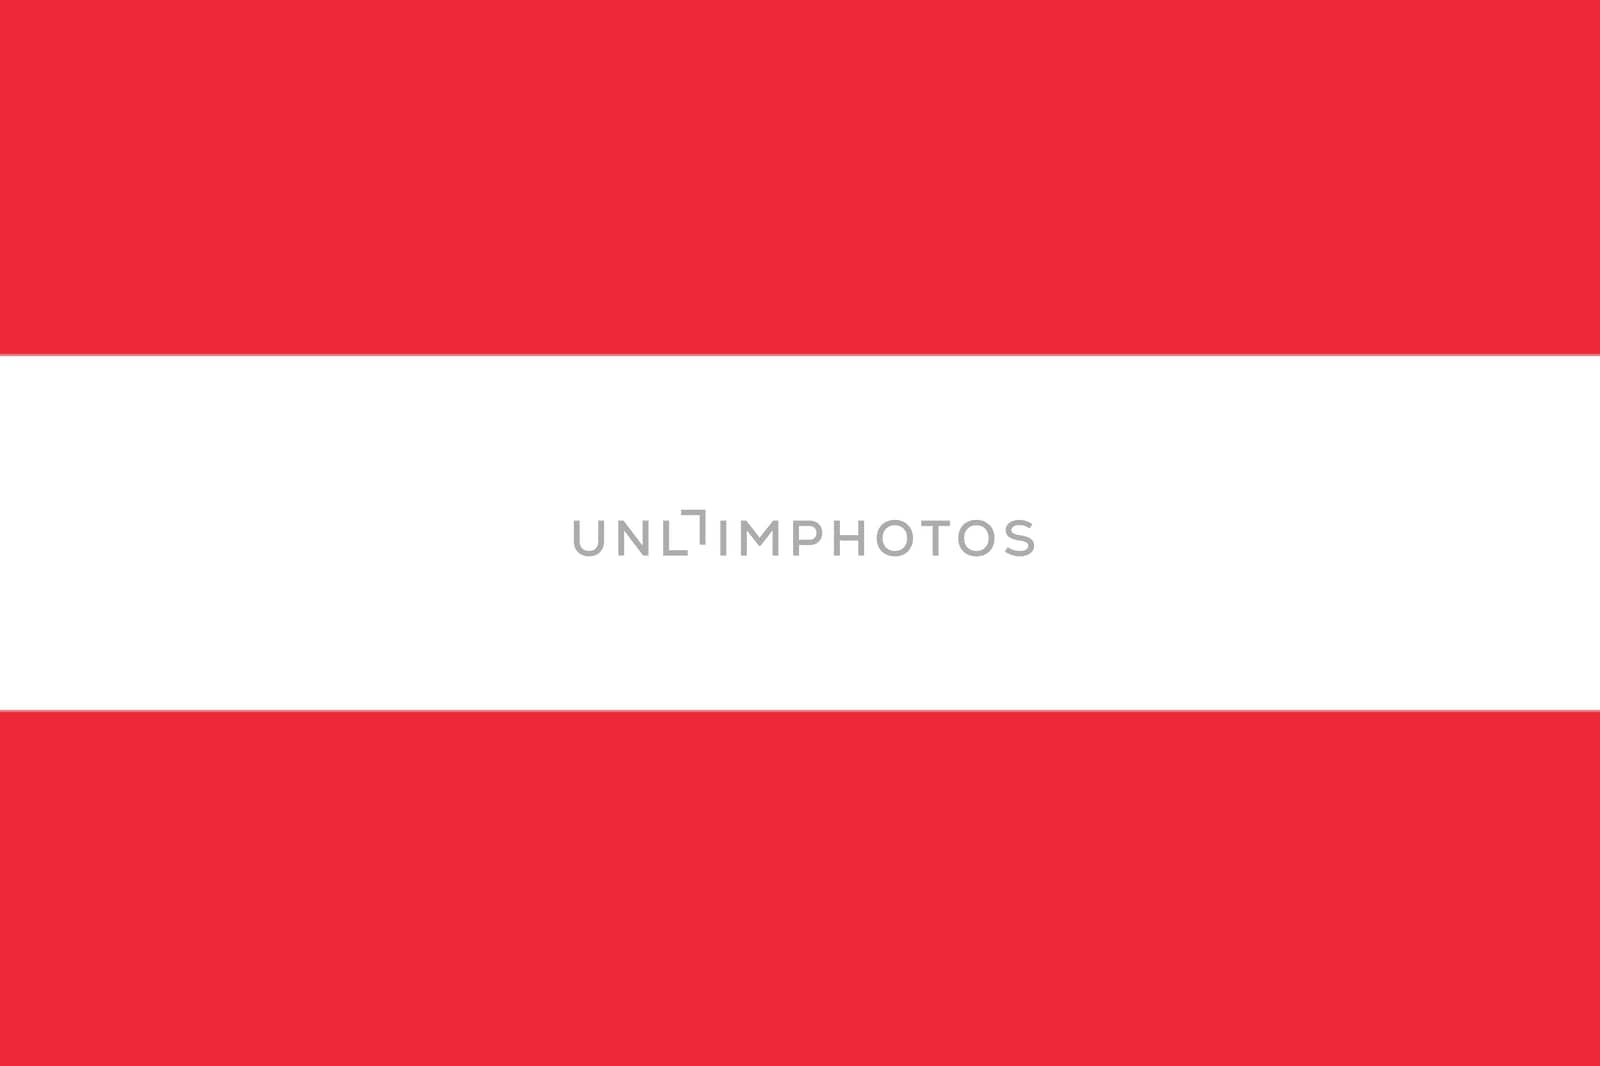 Austrian flag by paolo77